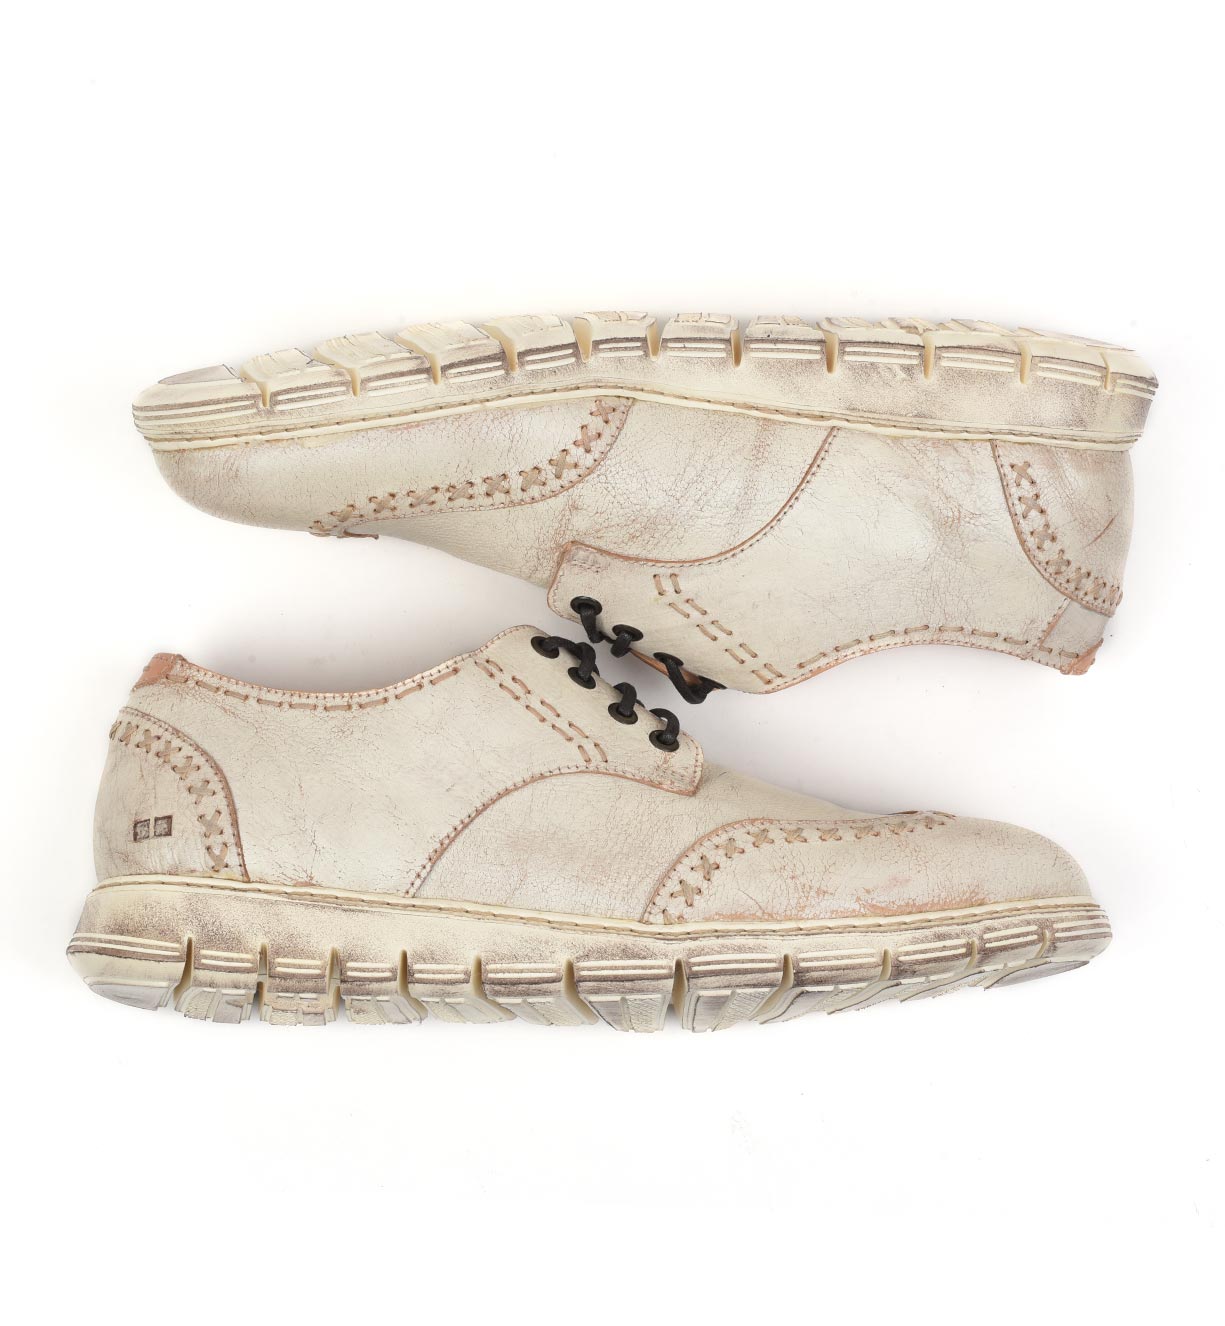 A pair of worn-out Bed Stu Cayuga II beige sneakers with black laces and brogue details on a white background.